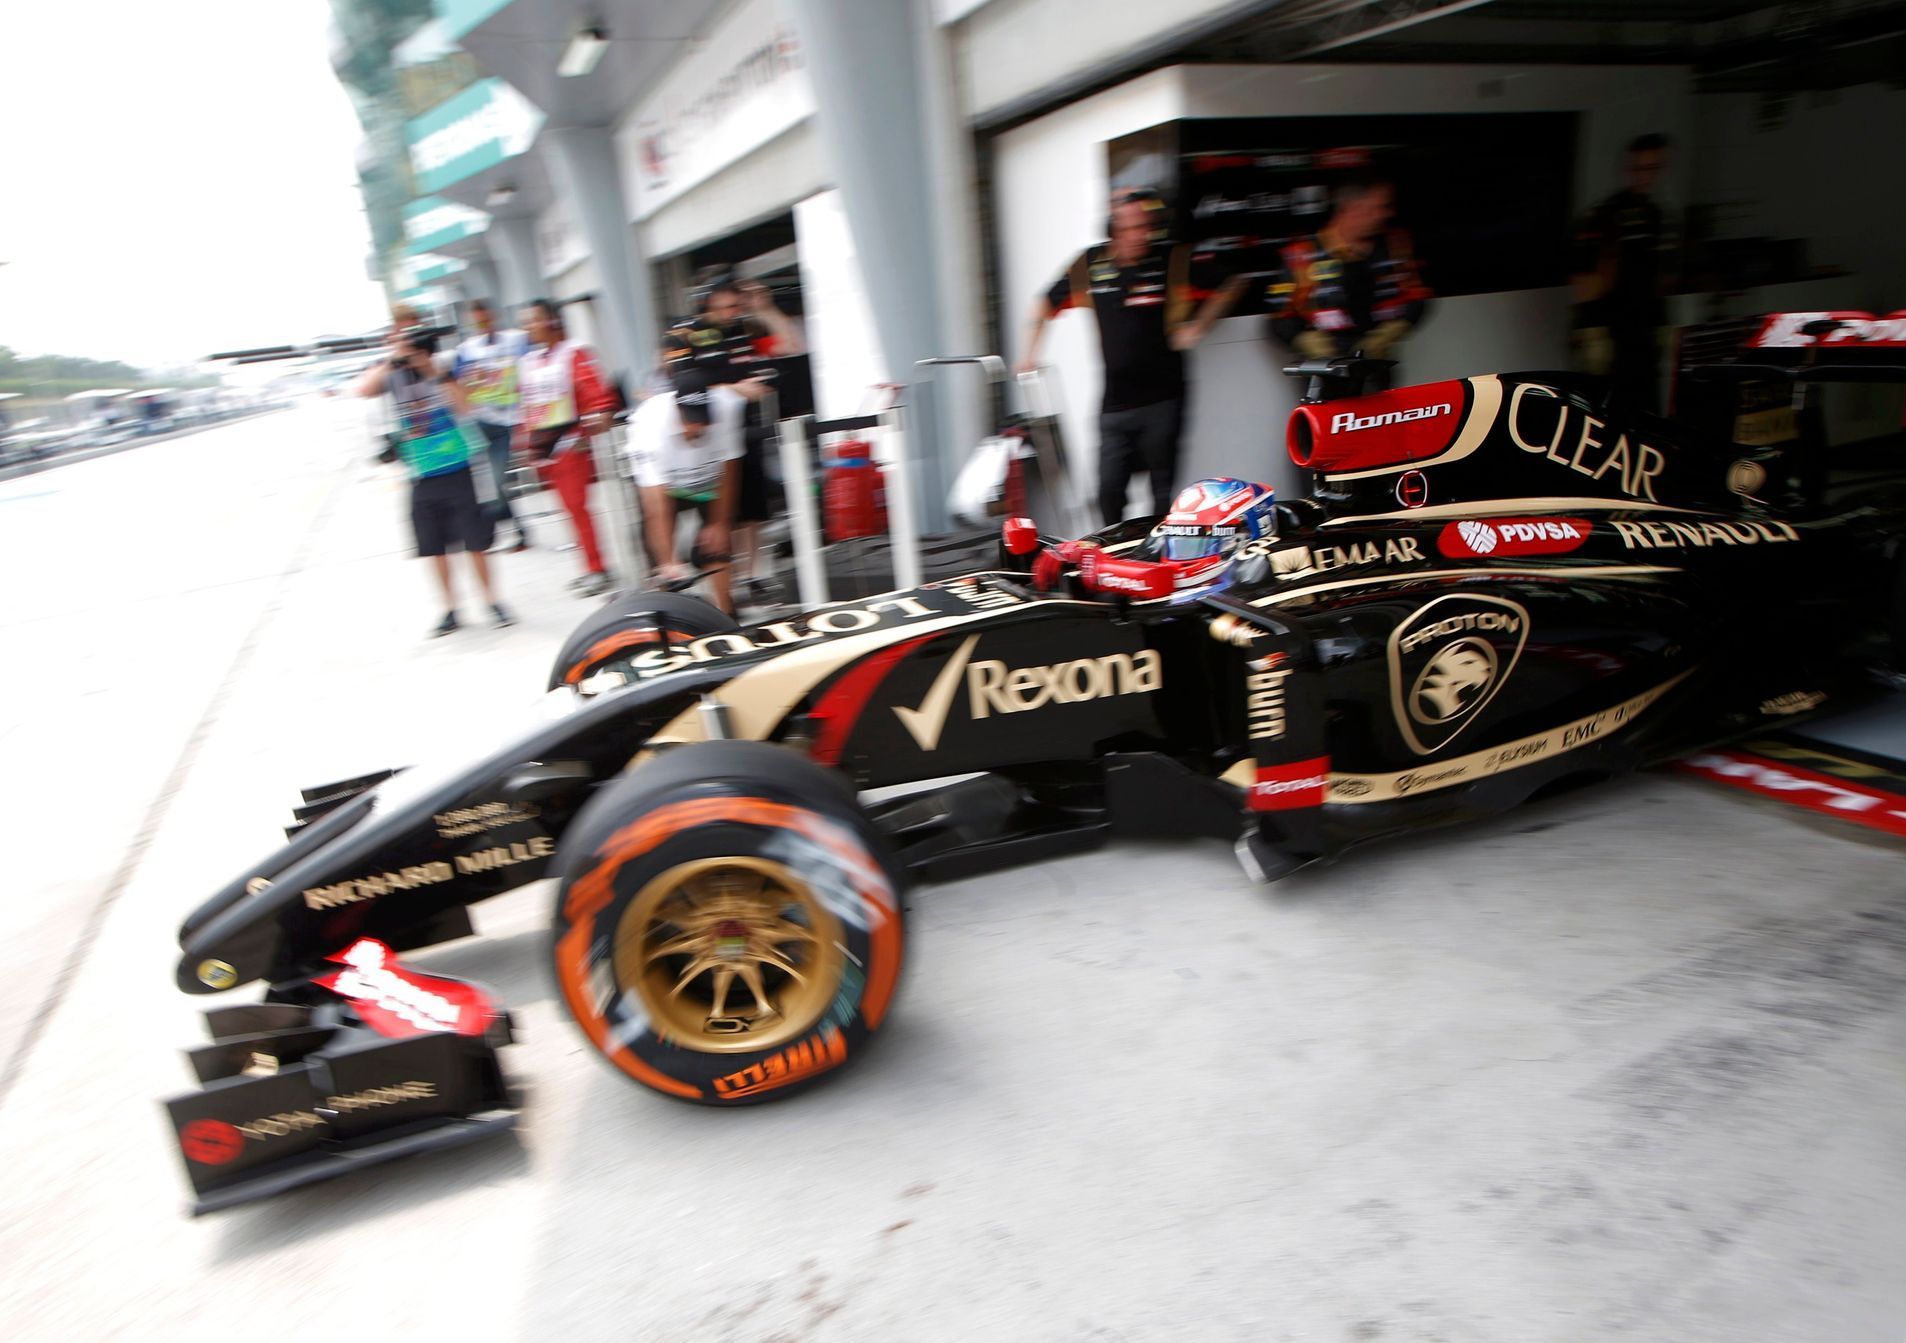 Lotus Formula One driver Grosjean leaves the garage during the second practice session of the Malaysian F1 Grand Prix at Sepang International Circuit outside Kuala Lumpur